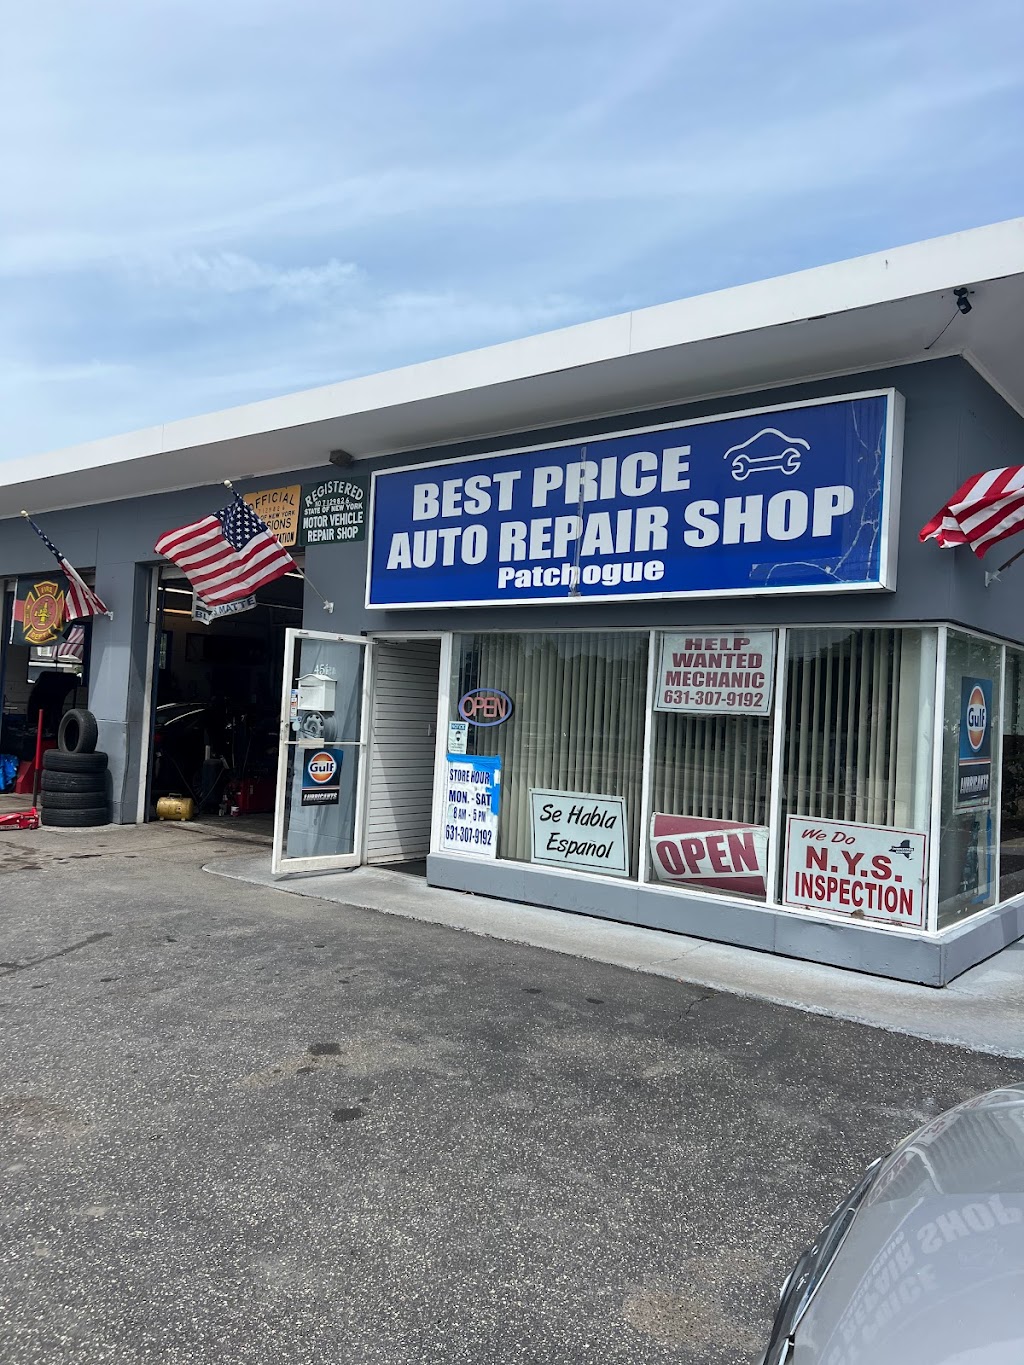 Best Price Auto Repair Patchogue | 451 W Main St, Patchogue, NY 11772 | Phone: (631) 307-9192